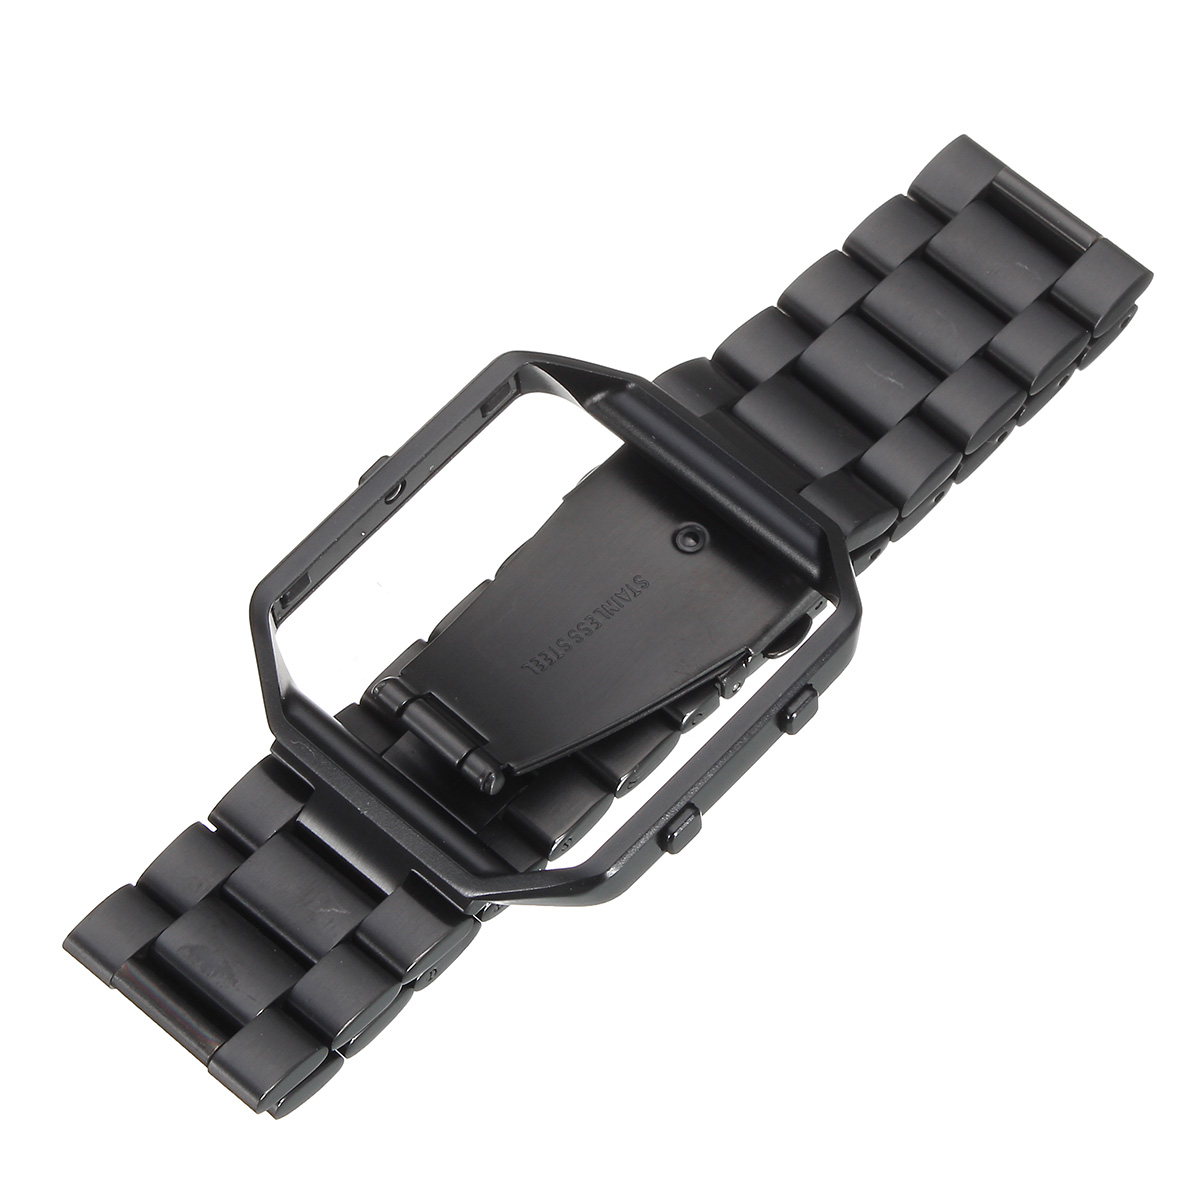 Bakeey-Steel-Metal-Frame-Watch-Case-Cover-Frame-Watch-Band-For-Fitbit-Blaze-Watch-1639063-10